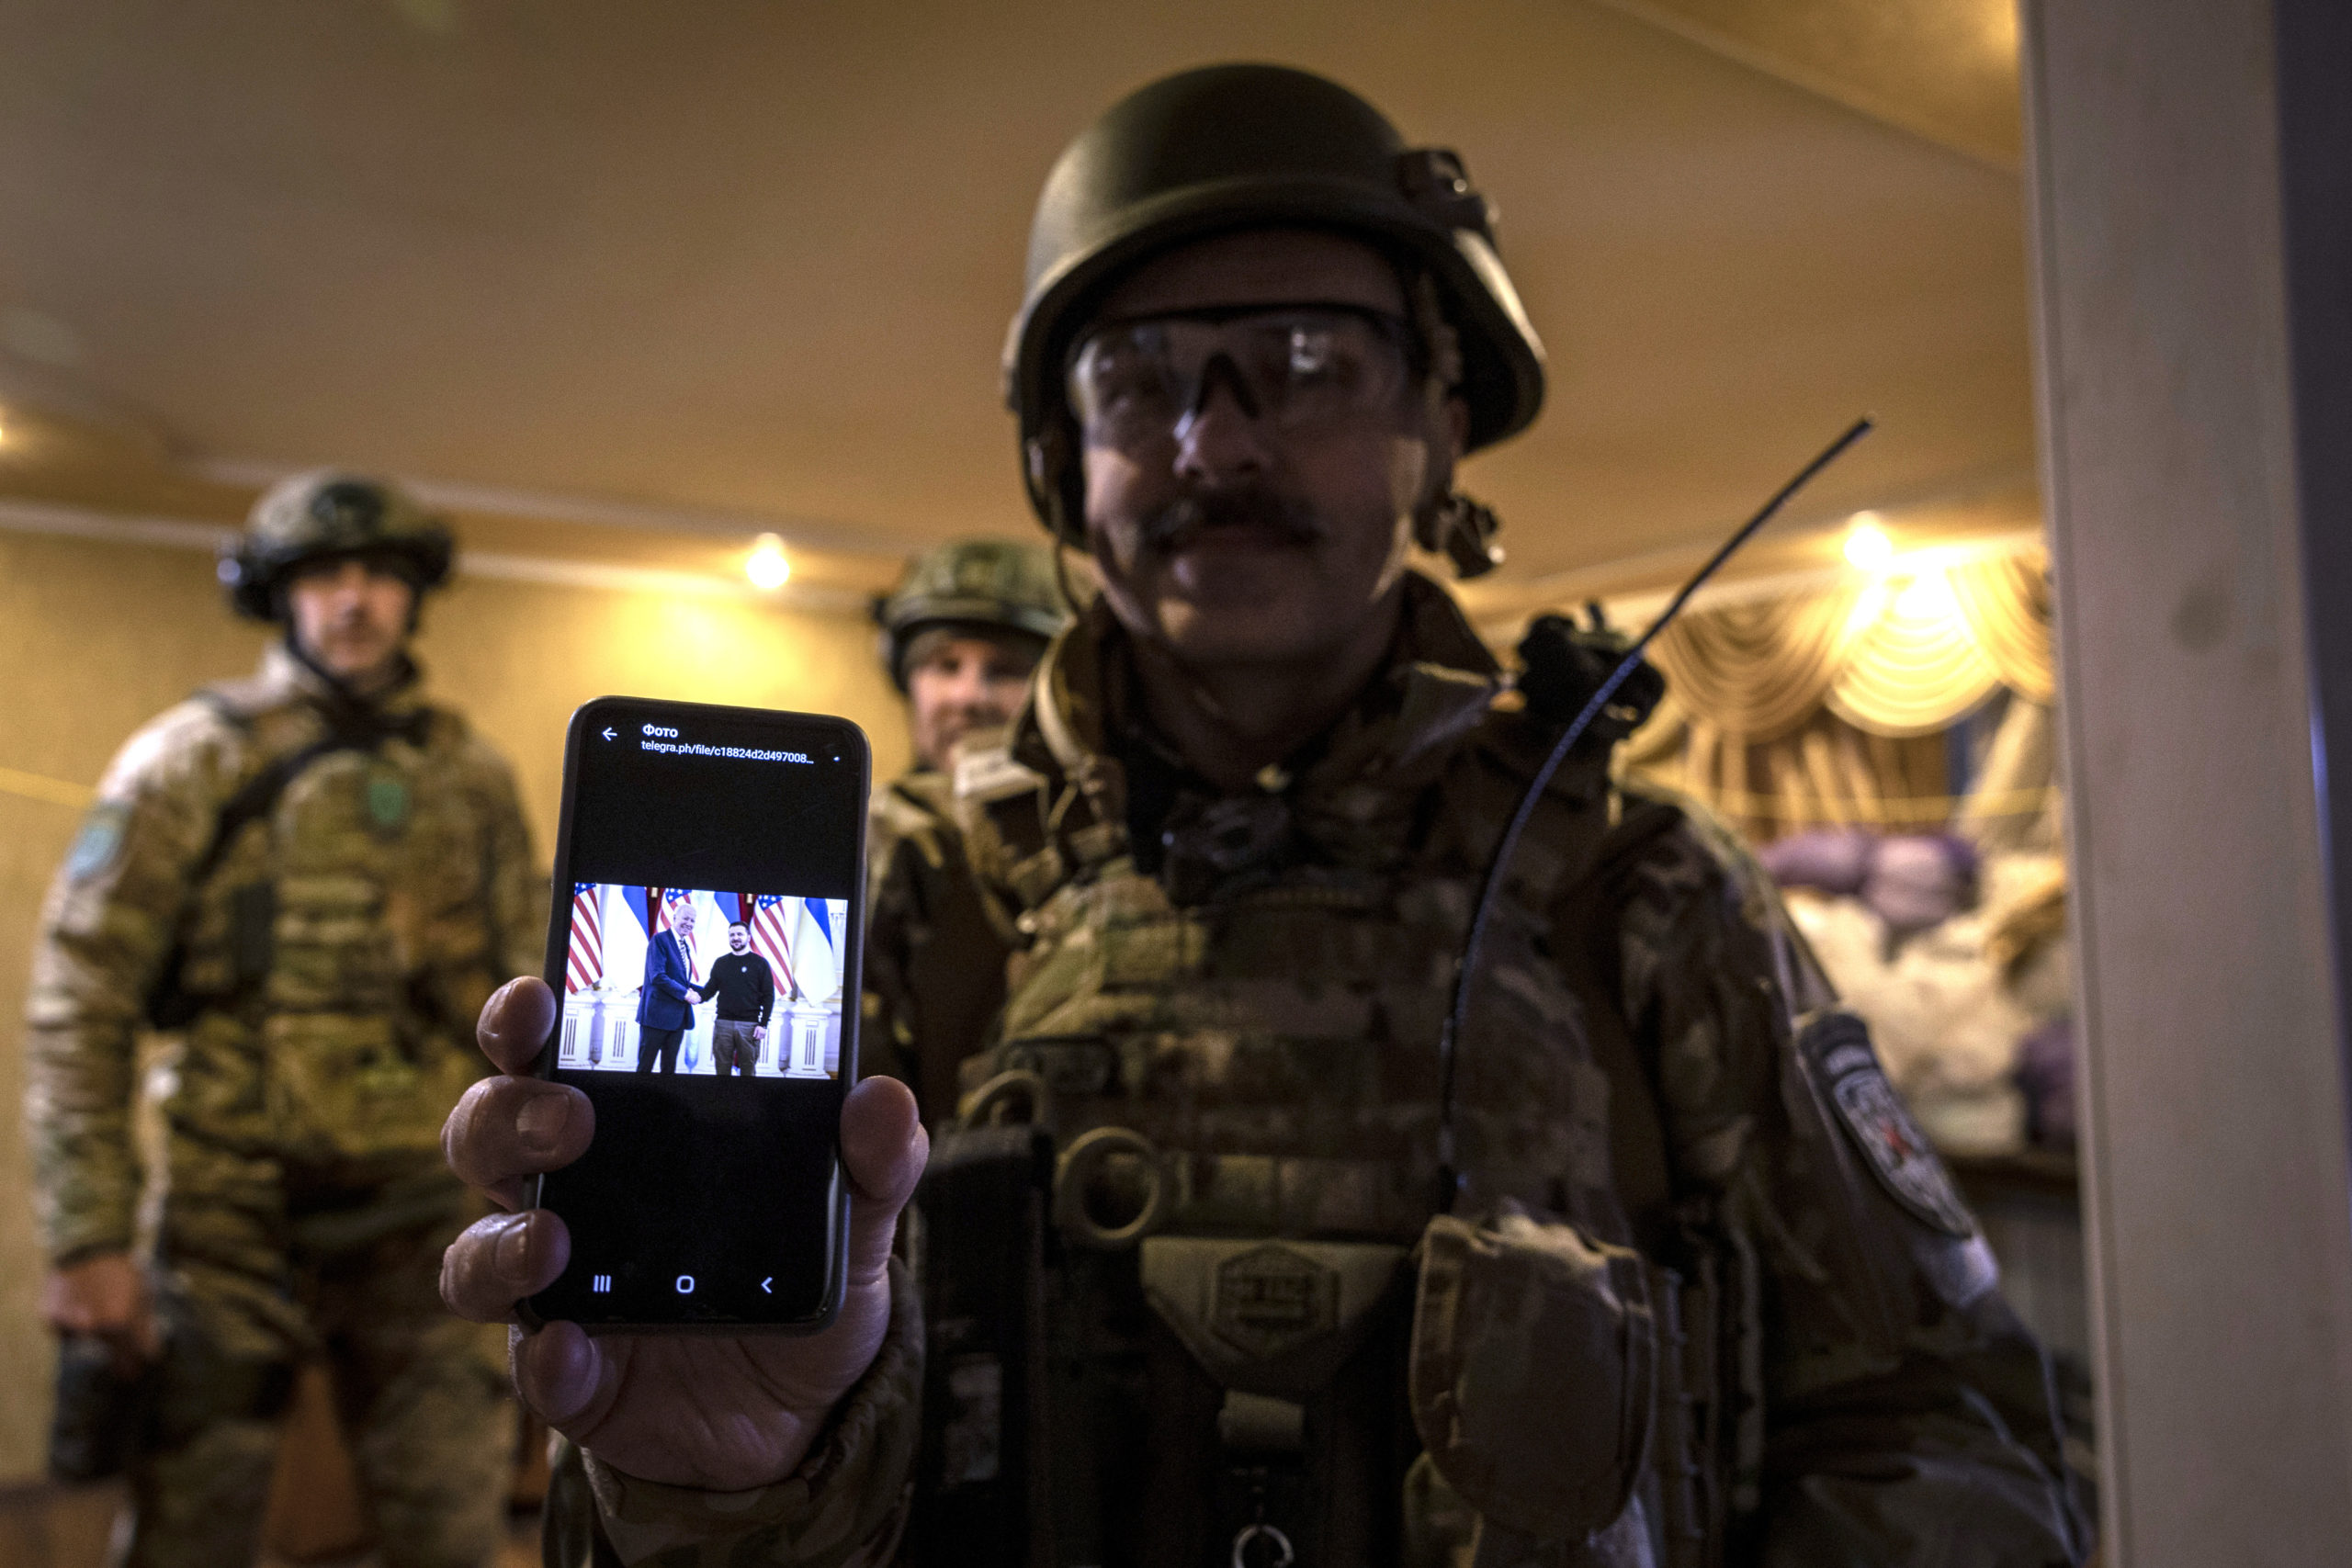 DONBAS, UKRAINE - FEBRUARY 20: Ukrainian paramedic "Austin" shows an image of U.S. President Joe Biden and Ukrainian President Volodymyr Zelensky on the day they met in Kyiv, while he and fellow medics were waiting for a call to transport wounded Ukrainian soldiers from frontline areas on February 20, 2023 in the Donbas region of eastern Ukraine. The paramedics, volunteering for Hospitallers, live in hidden locations close to the fighting, providing additional resources for evacuations to the military, which is often stretched thin. Hospitallers is a Ukrainian voluntary organization of doctors and paramedics who treat and evacuate soldiers from the battlefield. The group has more than 500 volunteers who work in two-week shifts as emergency responders. The organization relies on donations, both domestic and international, to fund the complex and often dangerous operation, including purchasing medical supplies and supporting the logistical needs of staff operating 32 ambulances and 76 pickup trucks, most in the war-torn Donbas region of eastern Ukraine. The volunteer paramedics come from a wide array of professions prior to joining Hospitallers and going through medical training. All are driven by the need to help Ukraine's war effort against Russia and relieve the suffering of wounded Ukrainian soldiers. Austin worked as a television camera operator in Kyiv before the war and joining Hospitallers. 